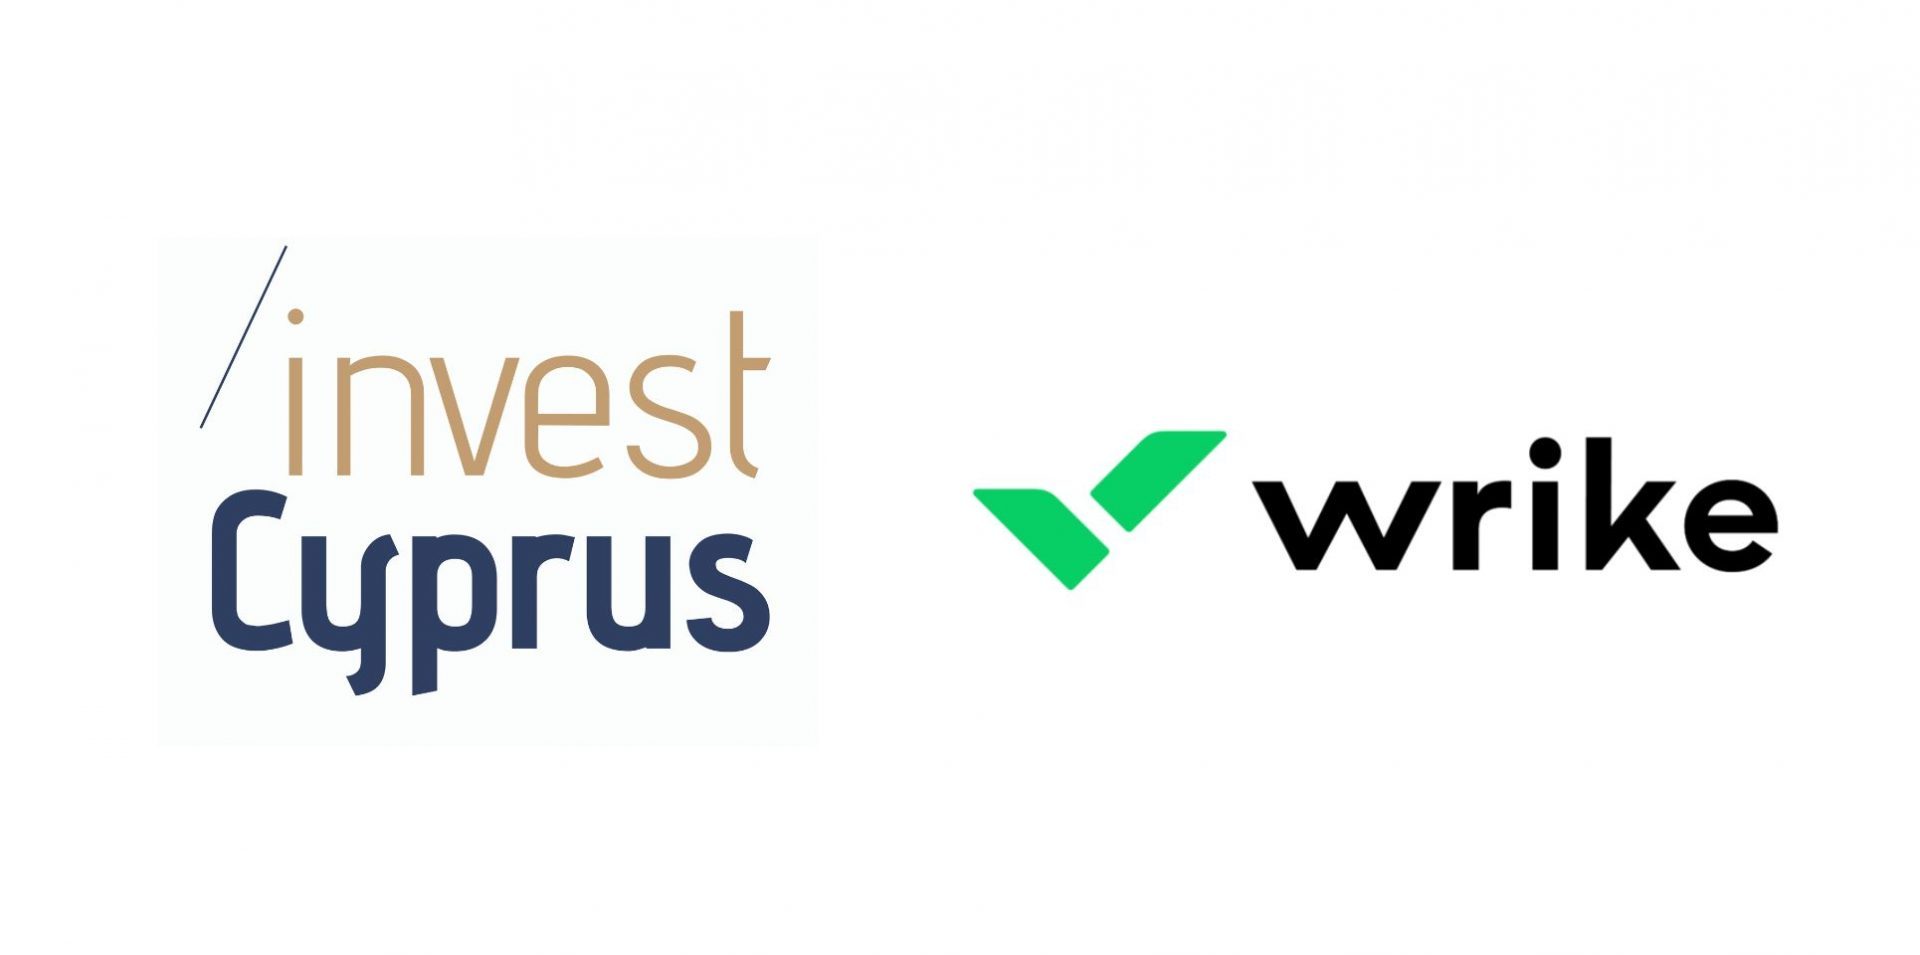 Invest Cyprus and Wrike logos